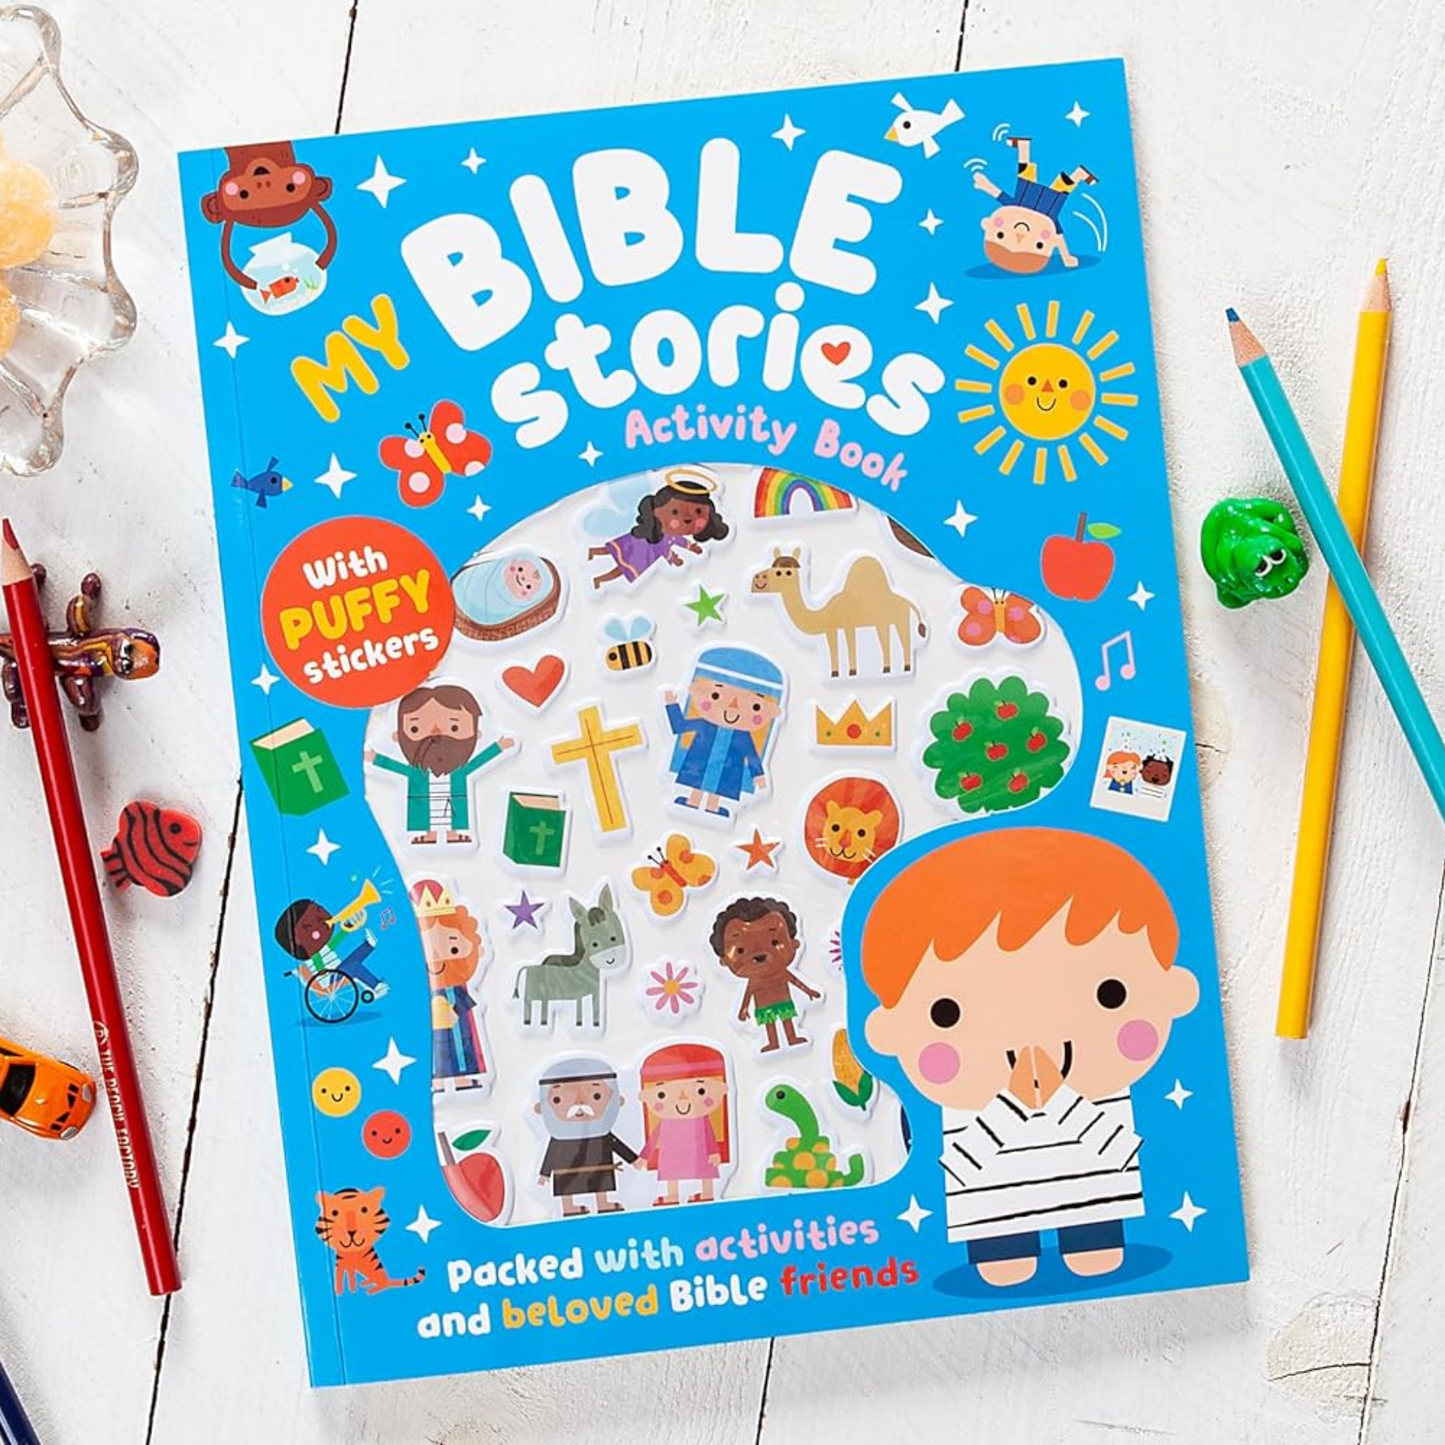 My Bible Stories Activity Book (Blue)